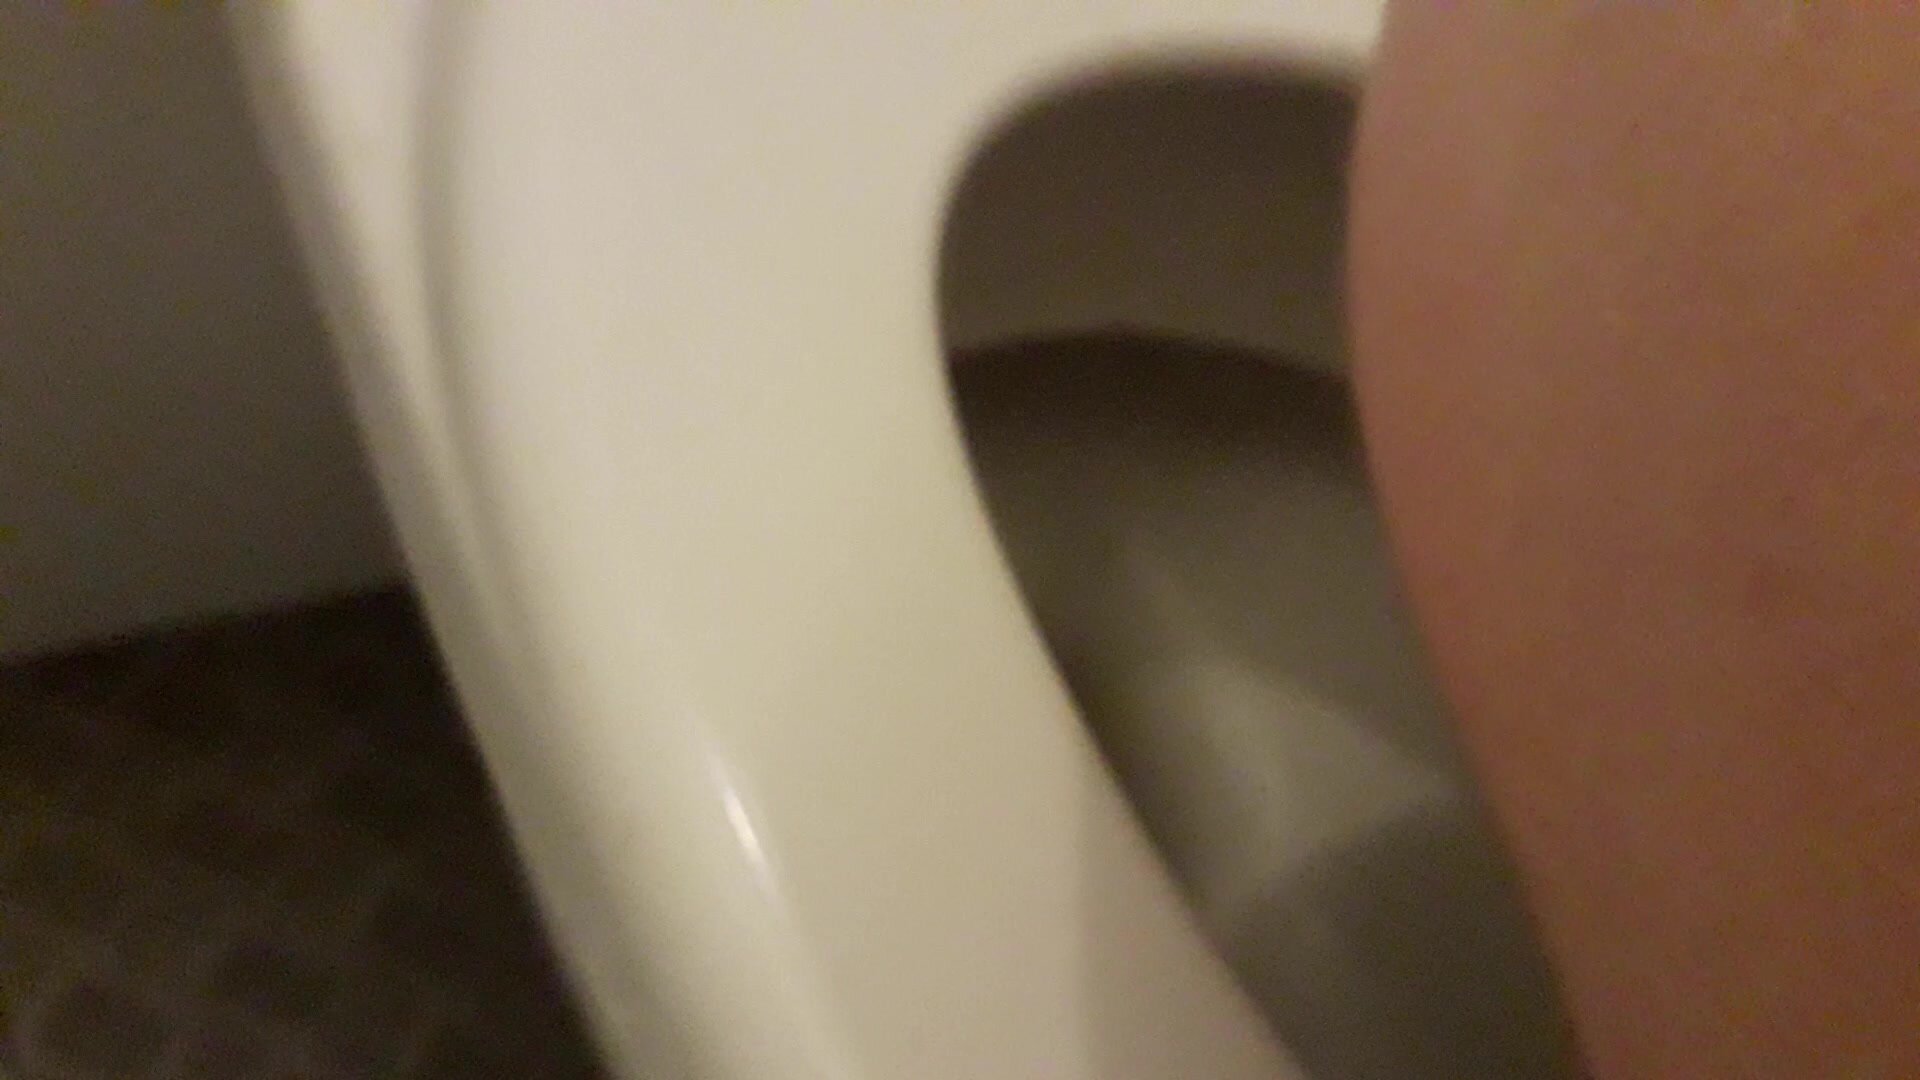 Taking a shit at work - video 5